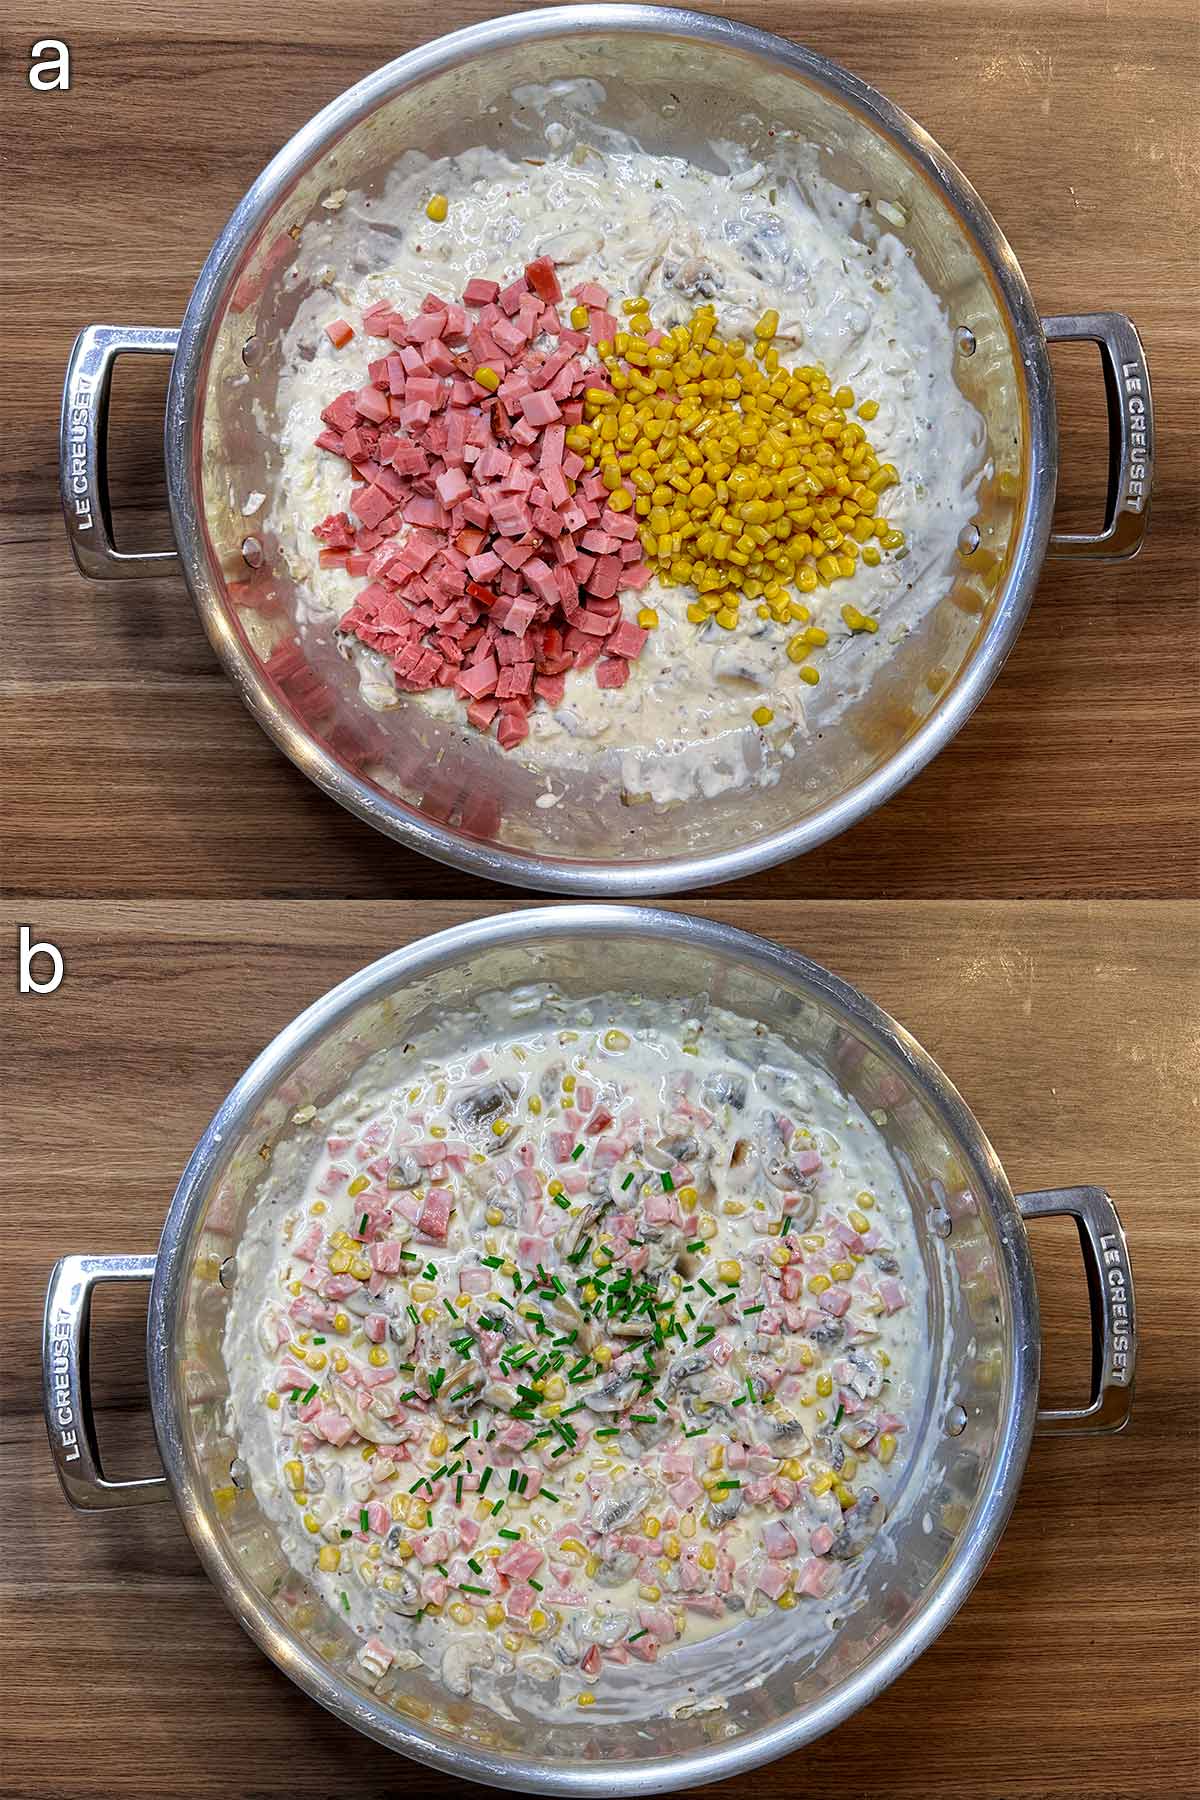 Two shot collage of chopped gammon and sweetcorn added to the pan, before and after mixing.